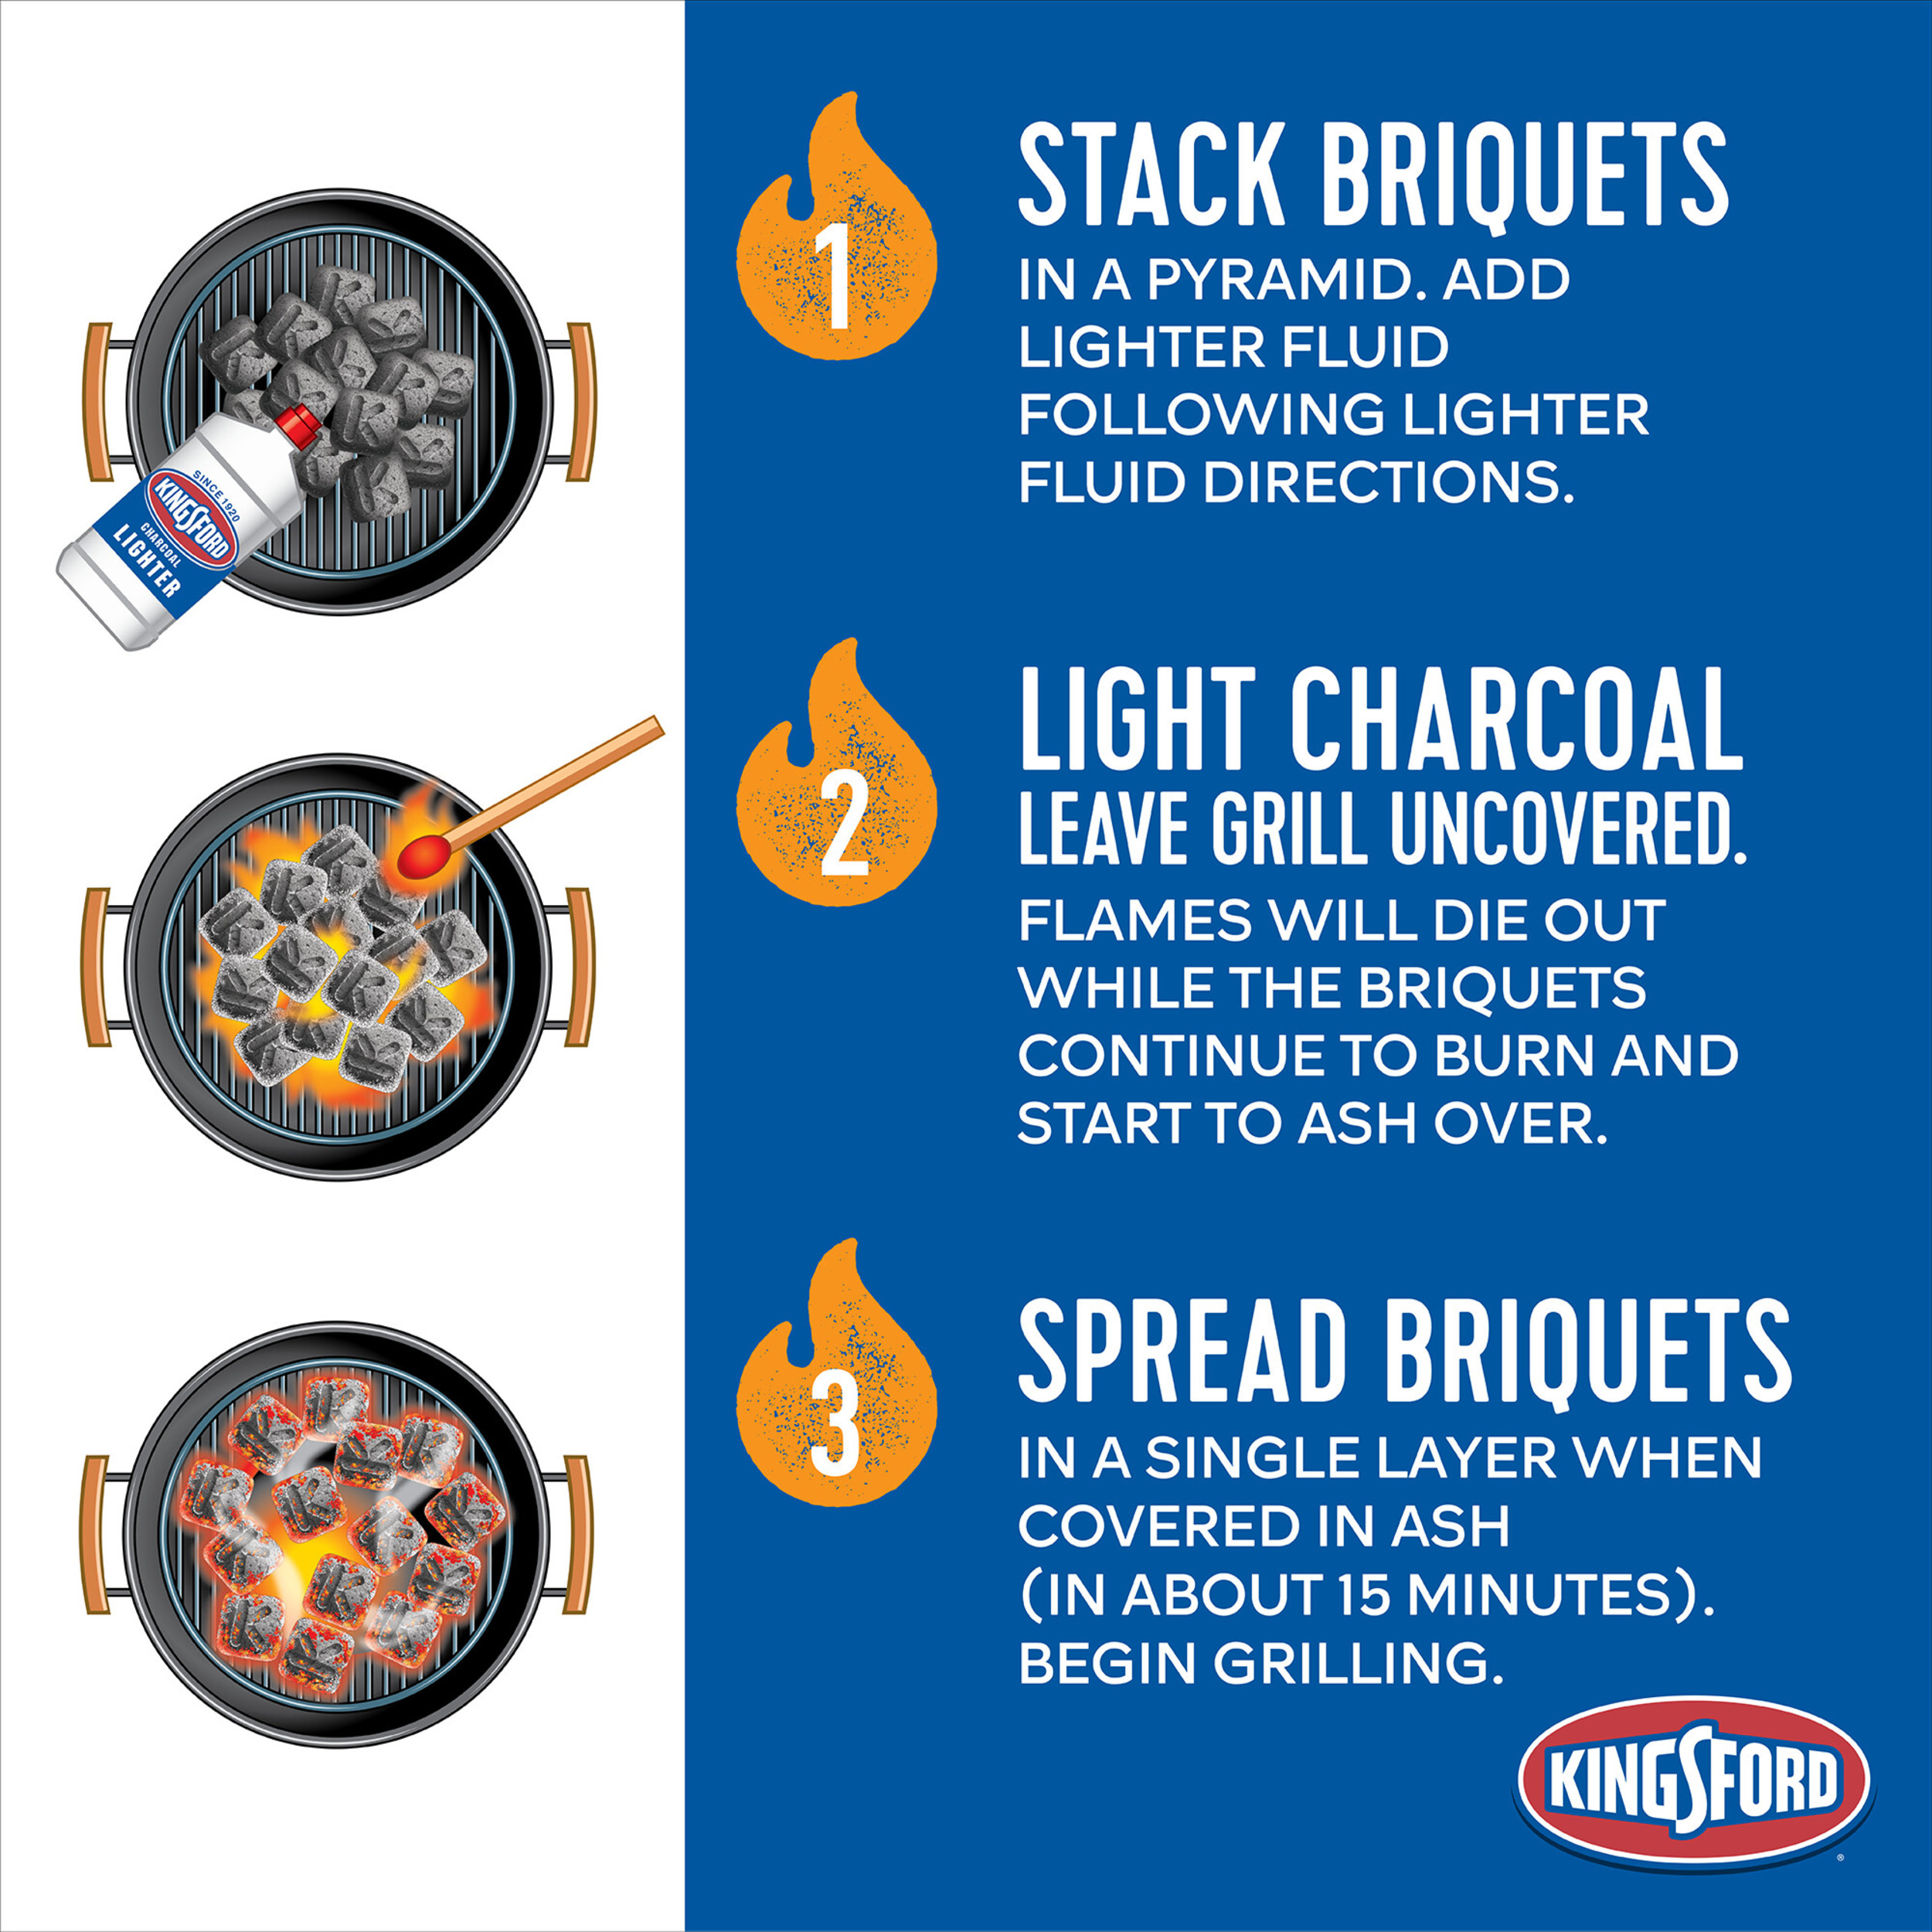 Kingsford Original Charcoal Briquettes, 16 lbs, 2 Pack - image 3 of 9